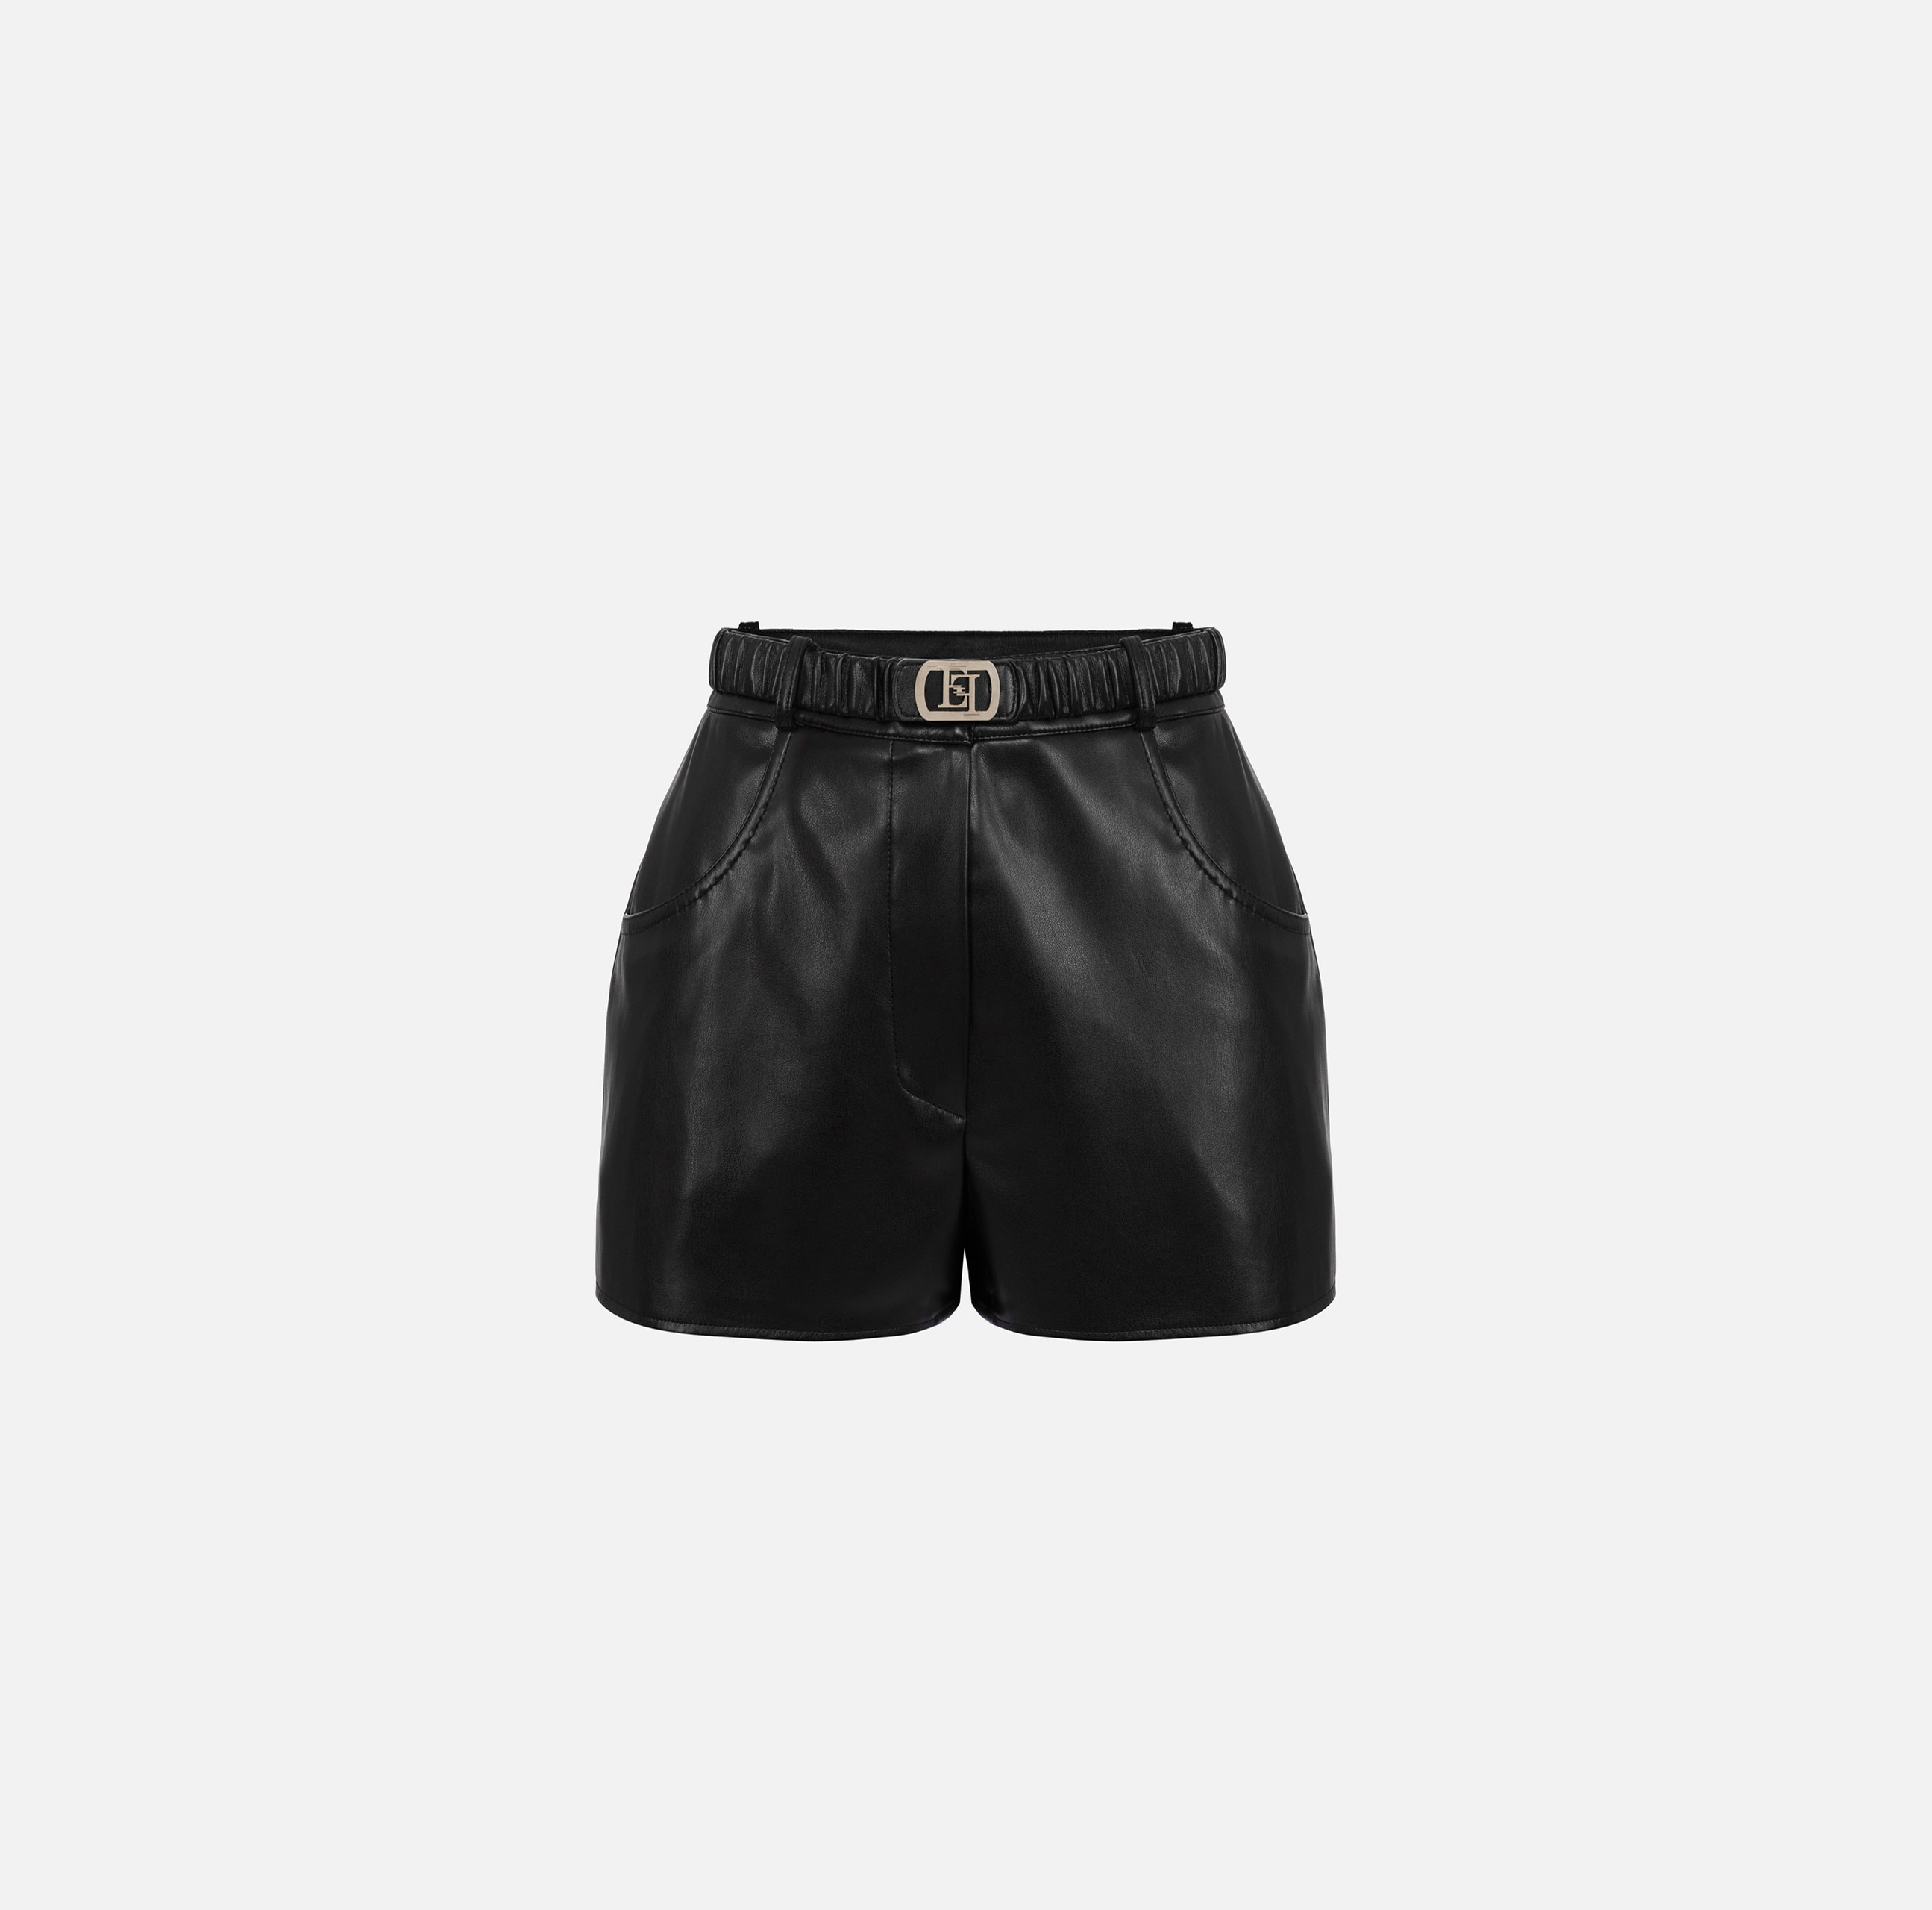 Shorts in synthetic material with belt - ABBIGLIAMENTO - Elisabetta Franchi